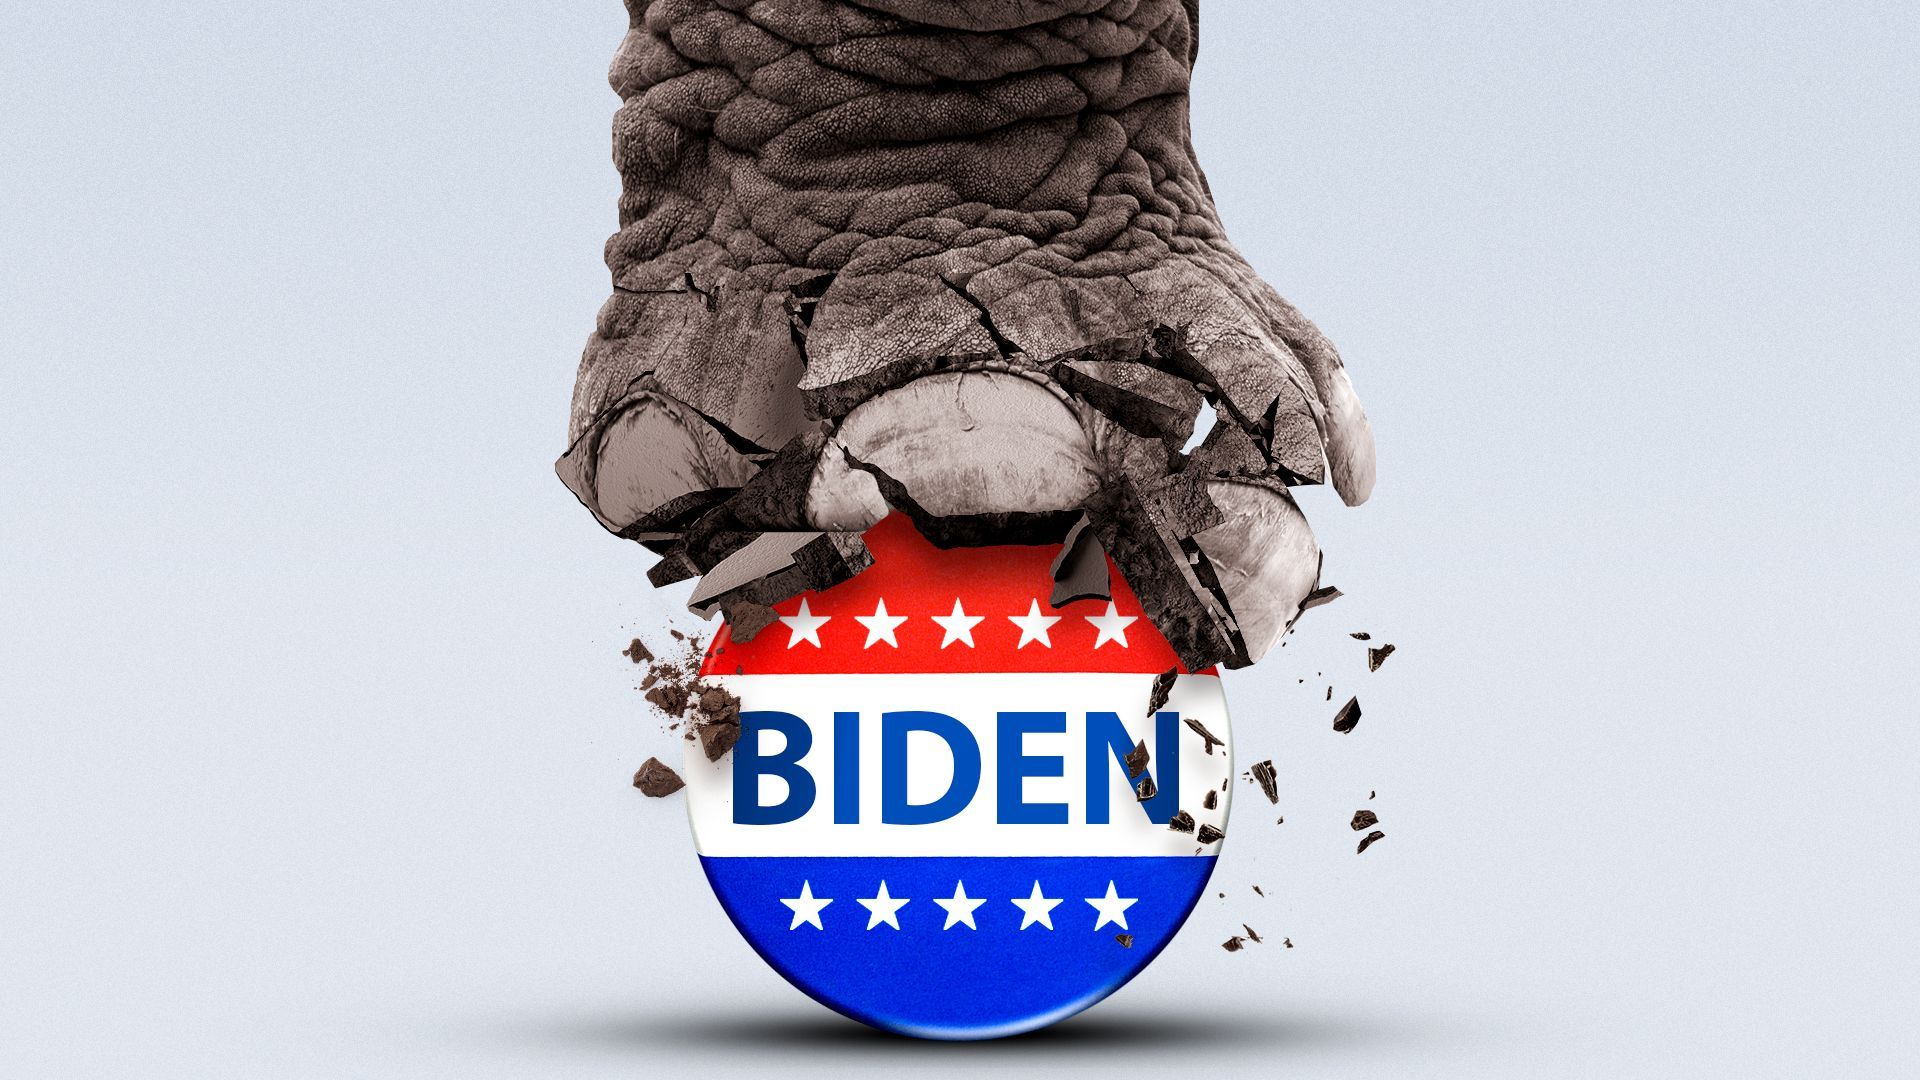 Illustration of an elephant foot crumbling and breaking as it steps on an upright Biden campaign pin.